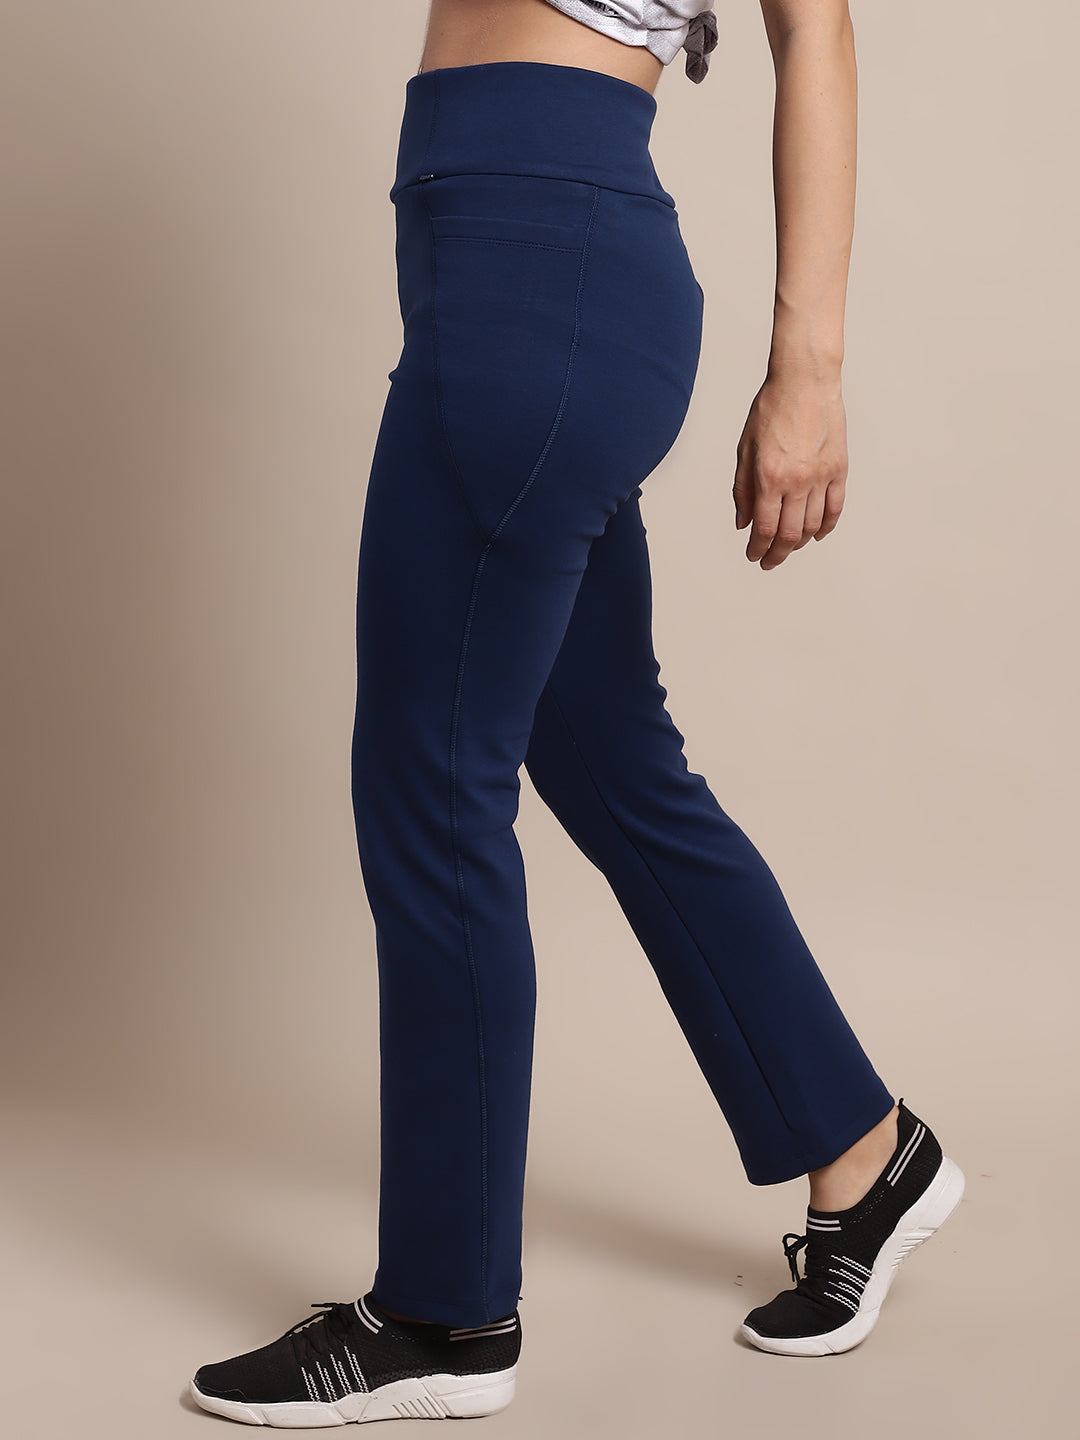 Buy ULTRA HIGH WAIST BLUE YOGA PANTS for Women Online in India